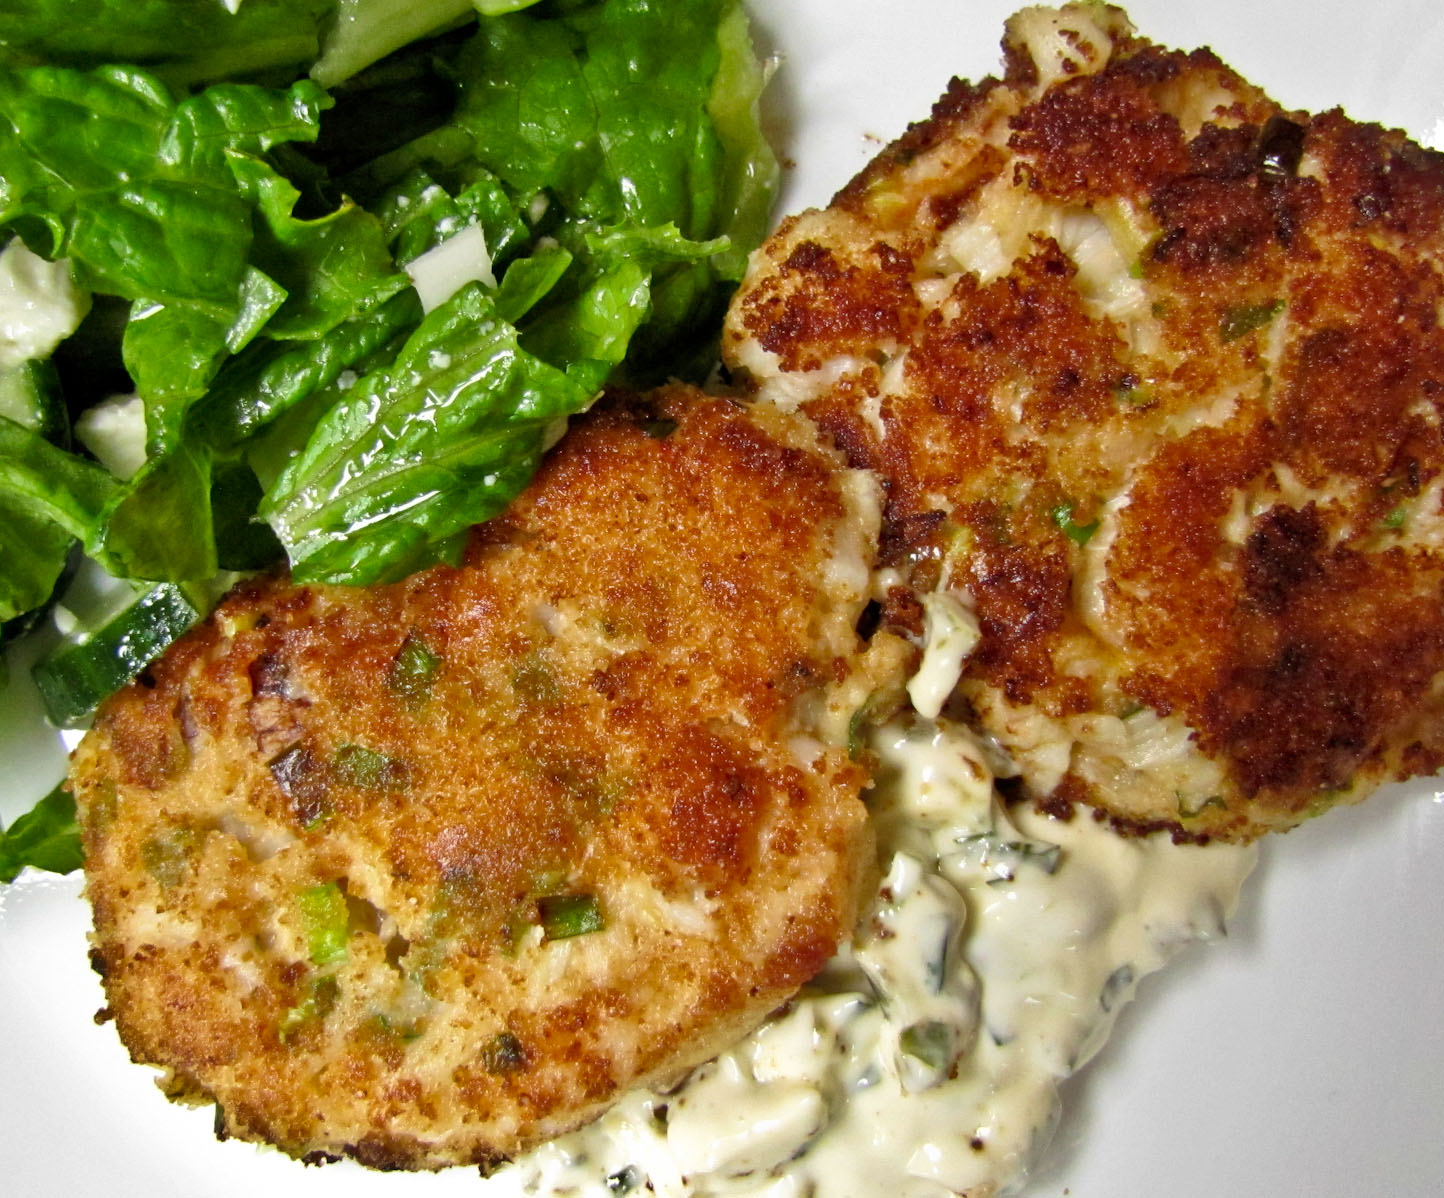 OnTheMove-In the Galley: Crab Cakes with Green Chile Tartar Sauce